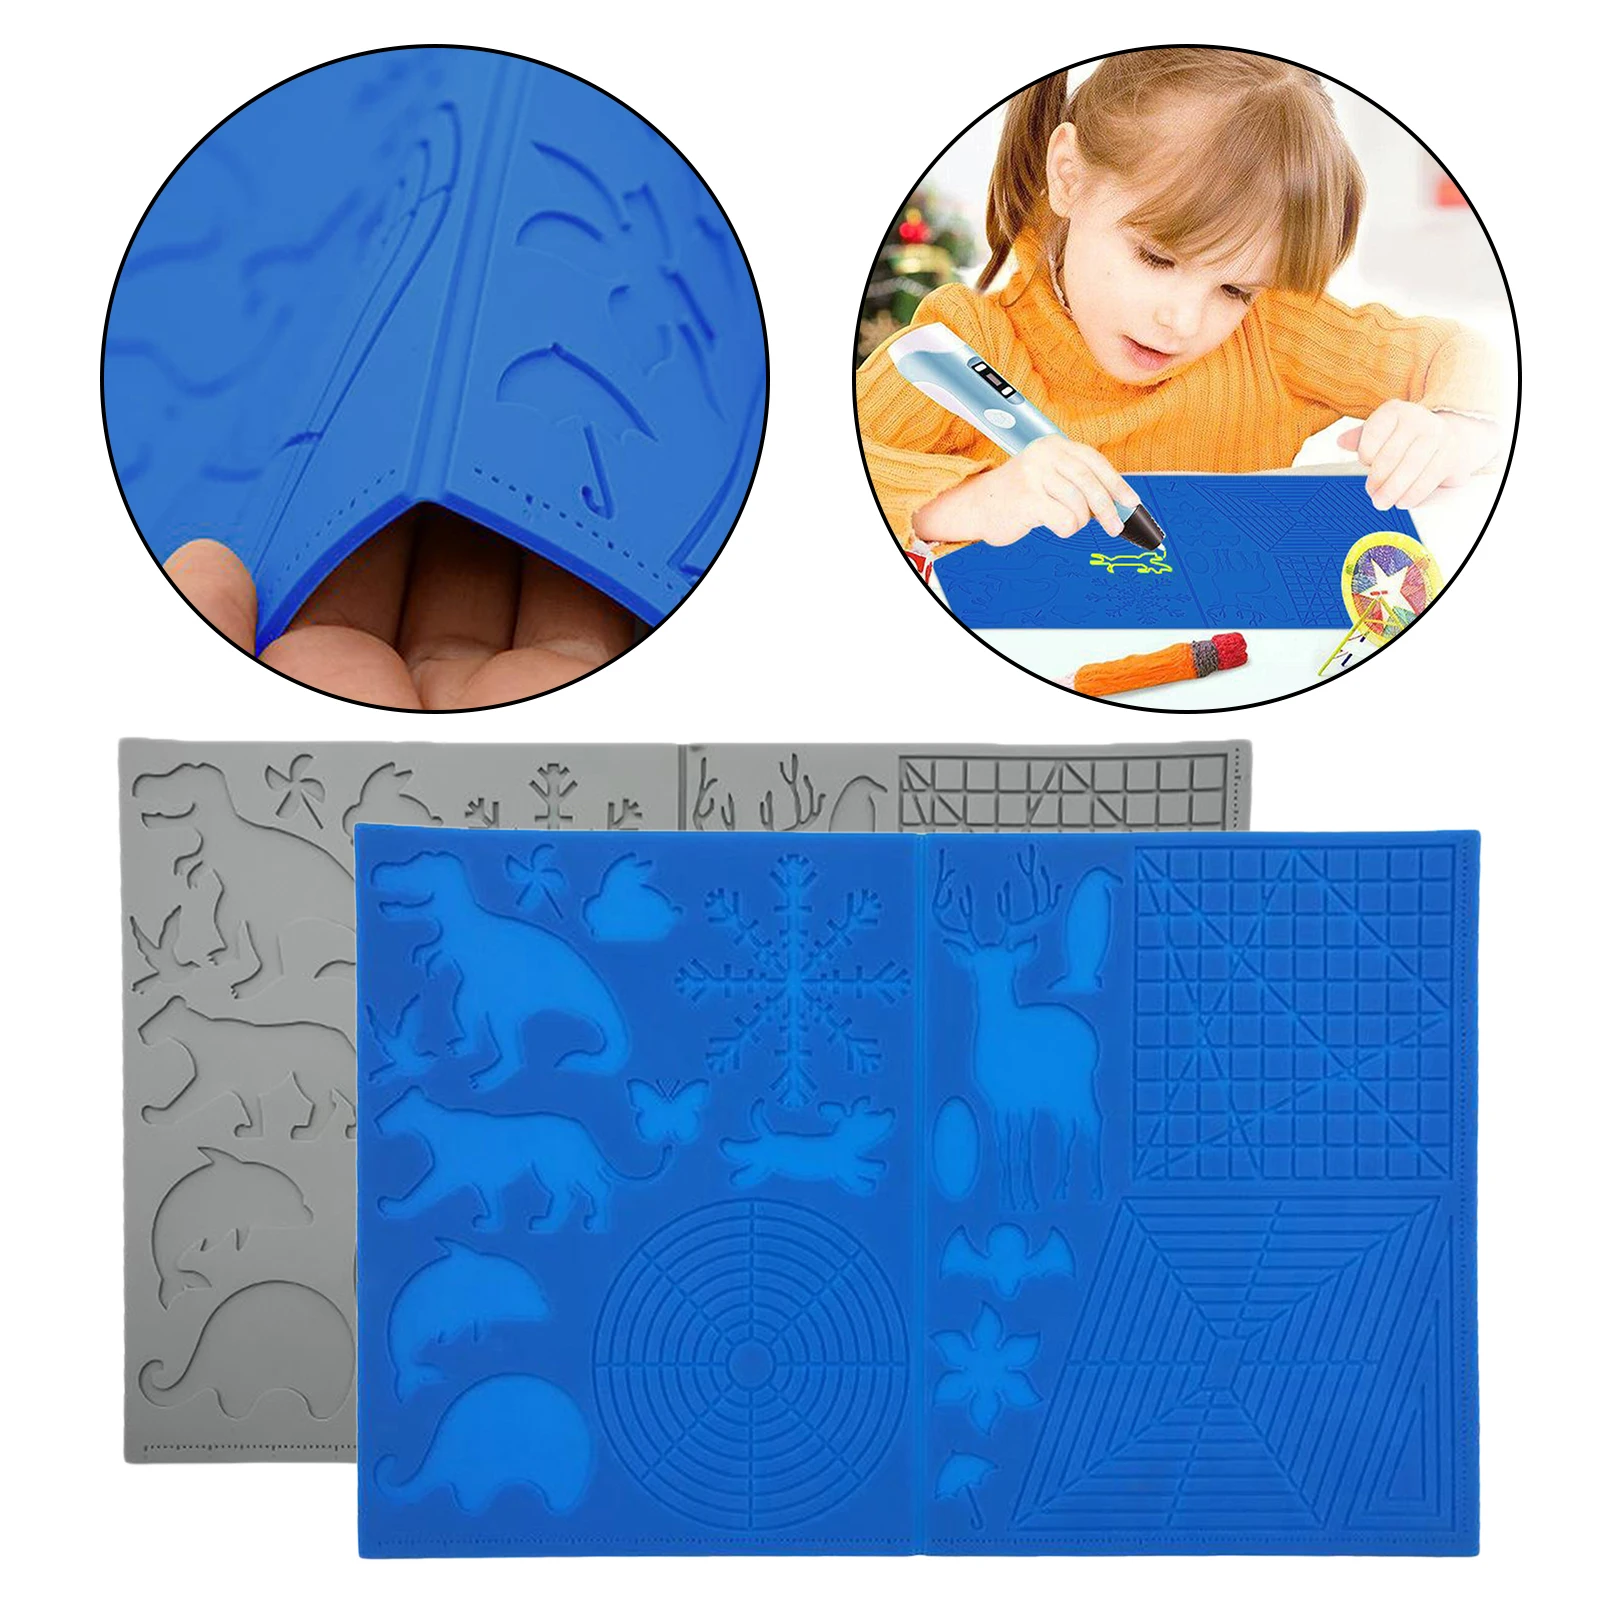 3D Pen Mat Silicone Drawing Mat Design Pad Create 3D Objects For Printing Pen Basic Template Art Supplies Drawing Tool Gift